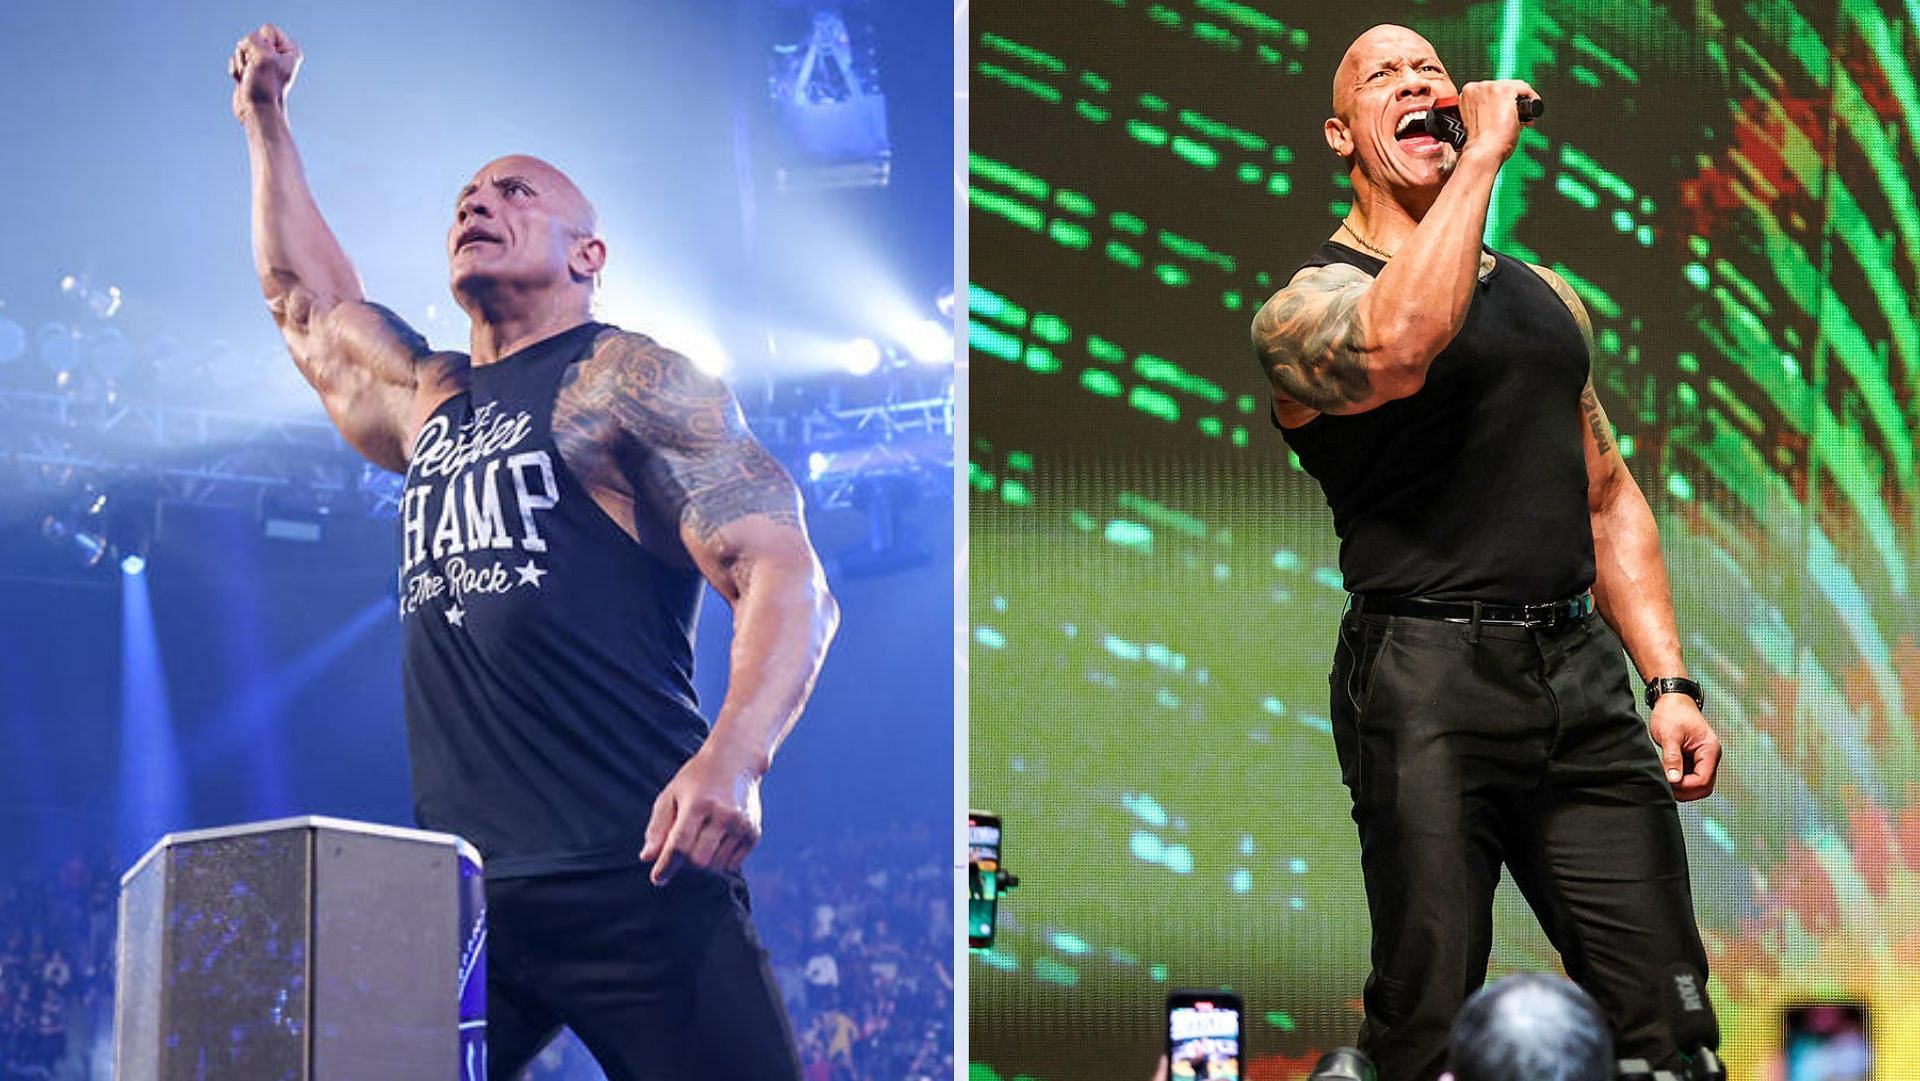 The Rock is back in WWE and aligned with Roman Reigns.